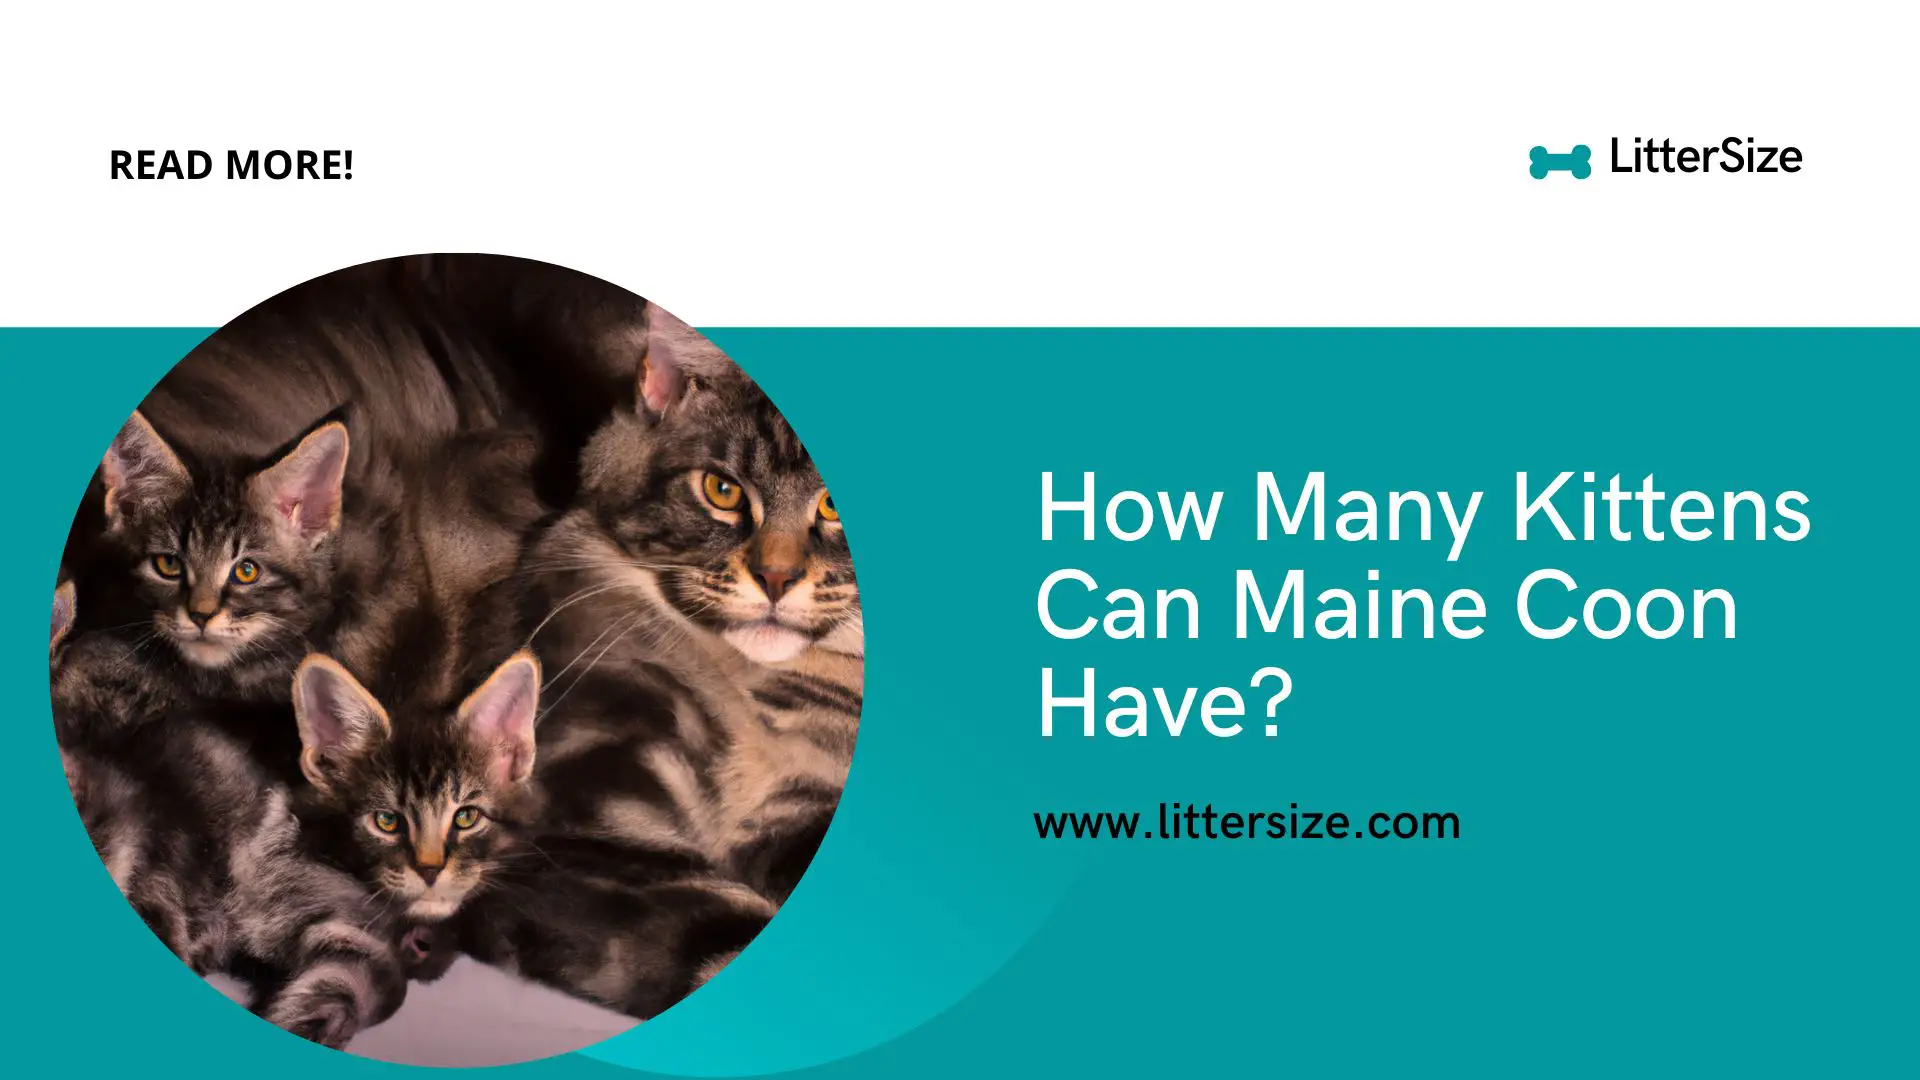 How Many Kittens Can Maine Coon Have?